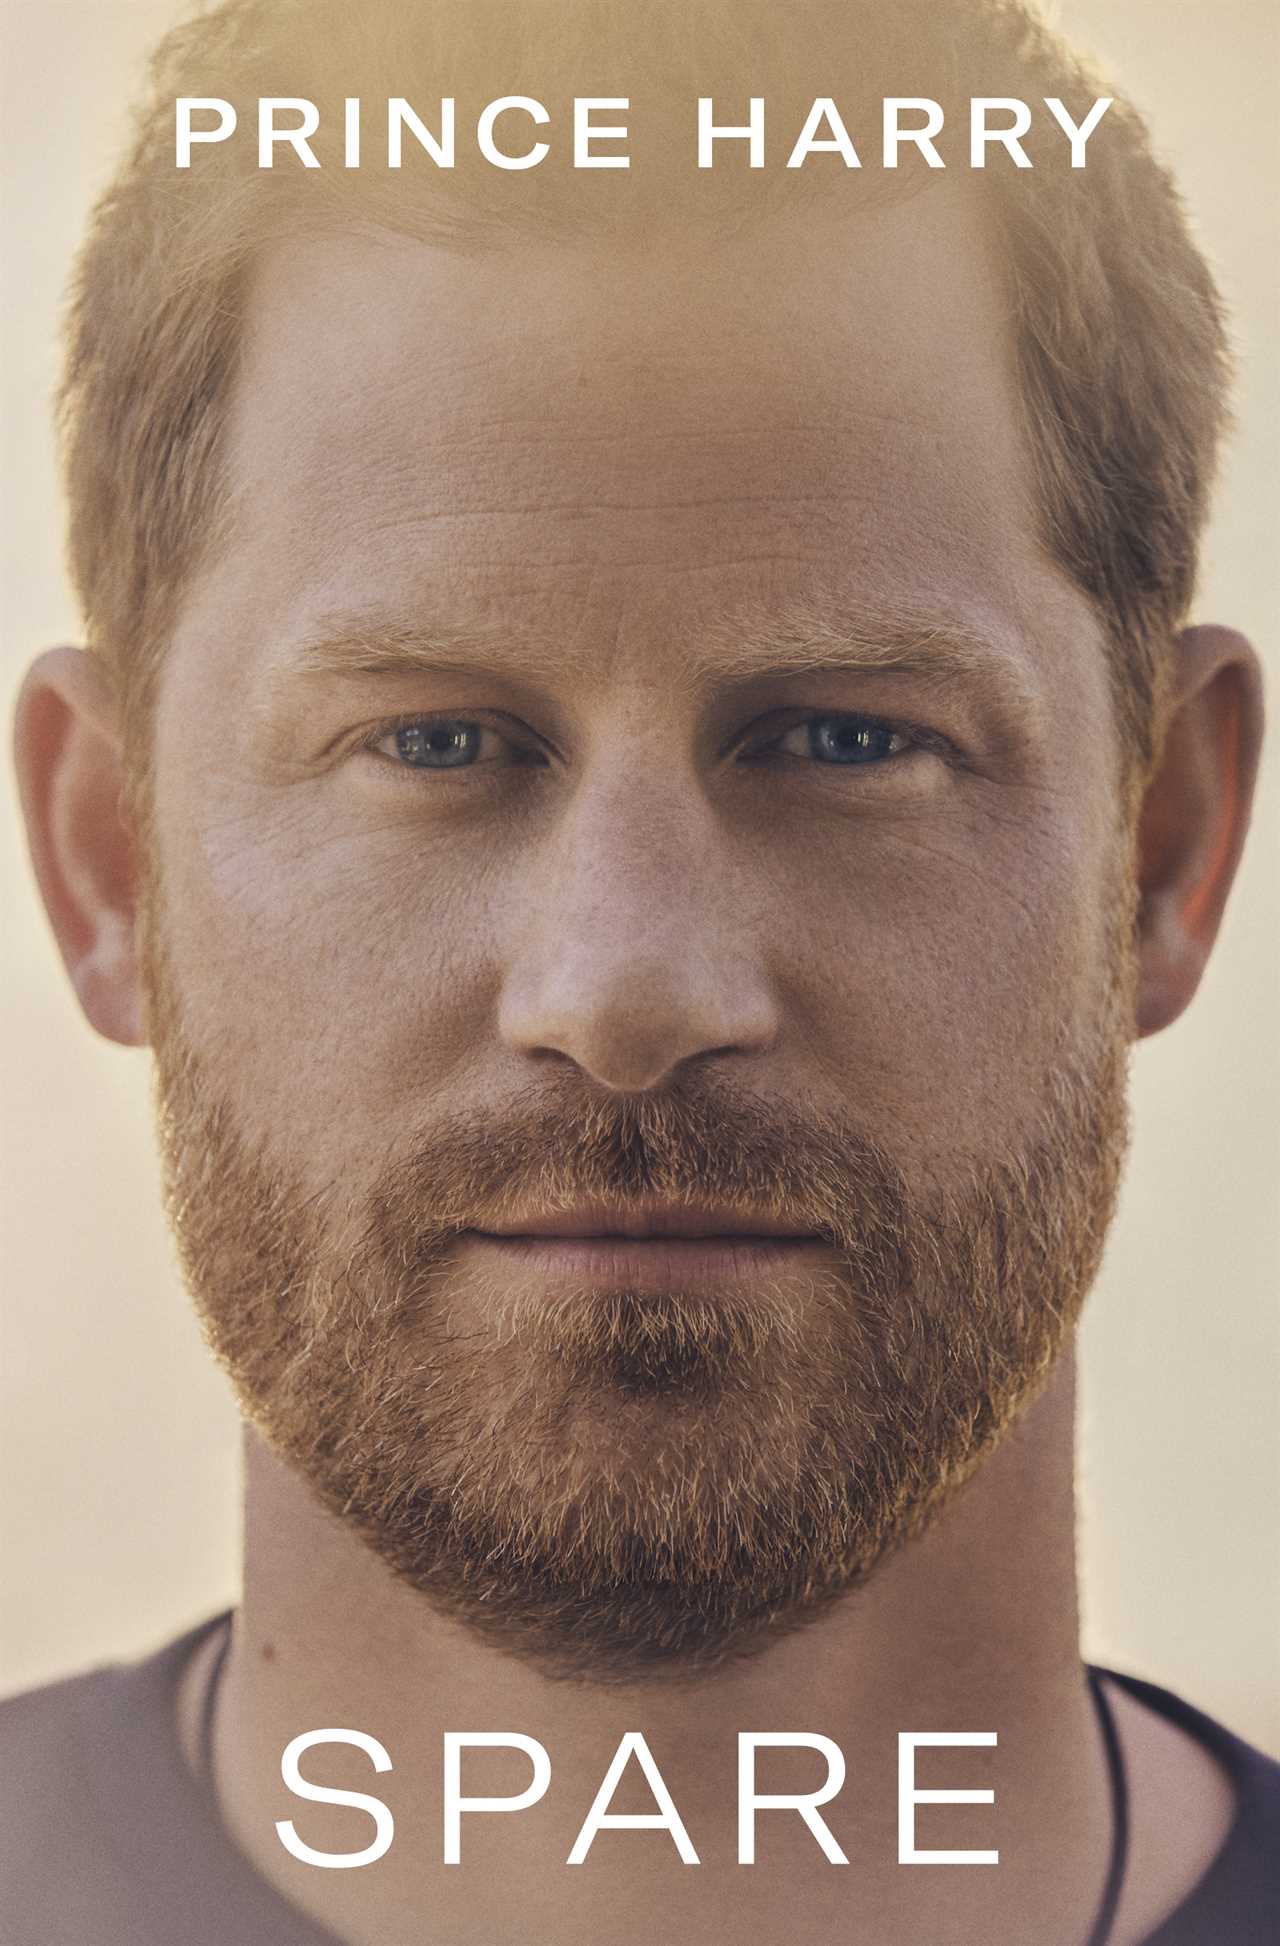 Prince Harry’s explosive memoir Spare is being flogged for FREE before it’s even hit shelves… here’s how to get it